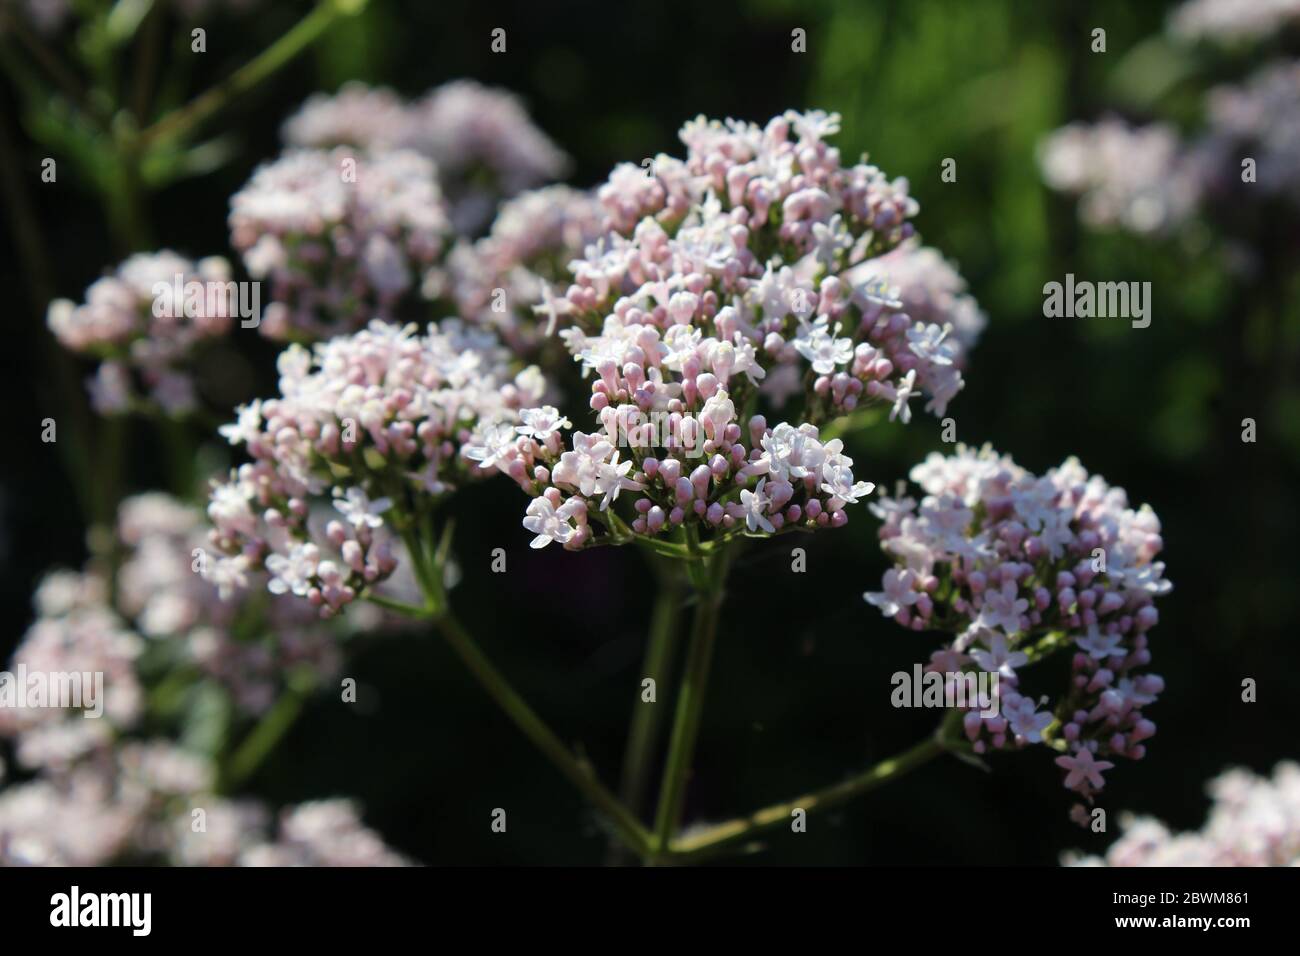 Close up image of the pale white pink flowers of Valeriana officinalis subsp. sambucifolia, also known as ?Elder-leaved valerian. Against a natural da Stock Photo